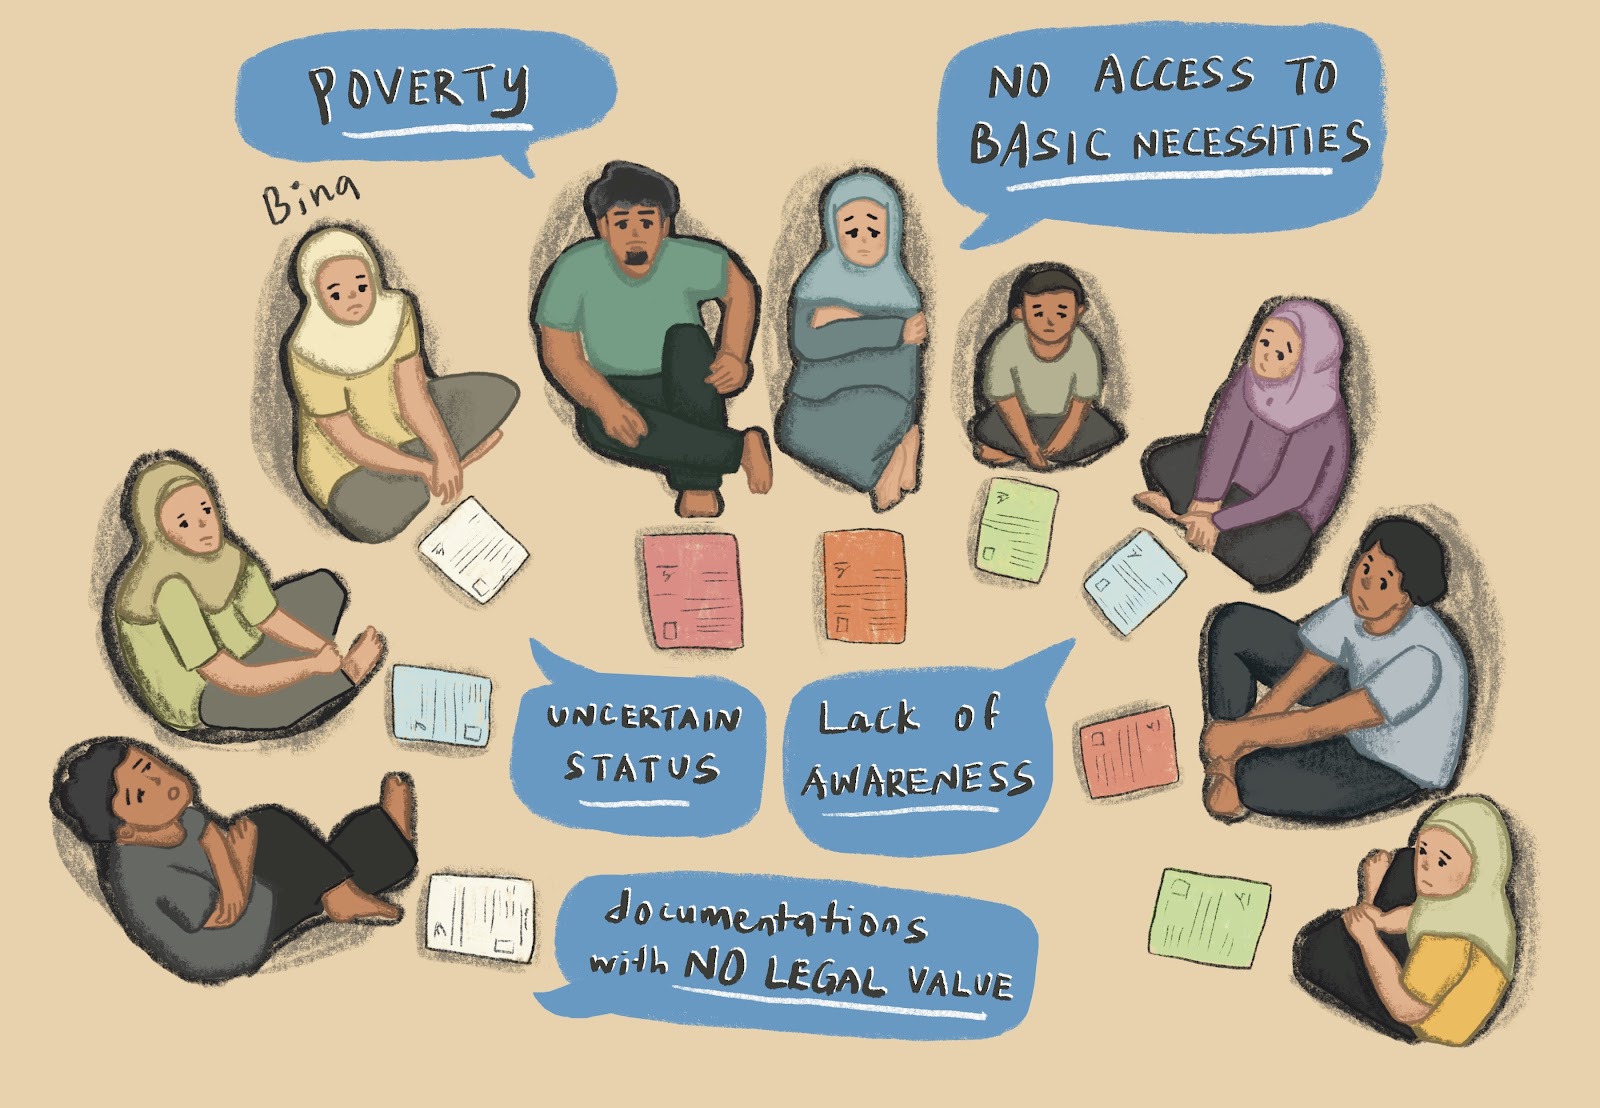 A group of stateless people discussing their concerns, i.e. poverty, no access to basic necessities, uncertain status, lack of awareness, and documentations with no legal value.